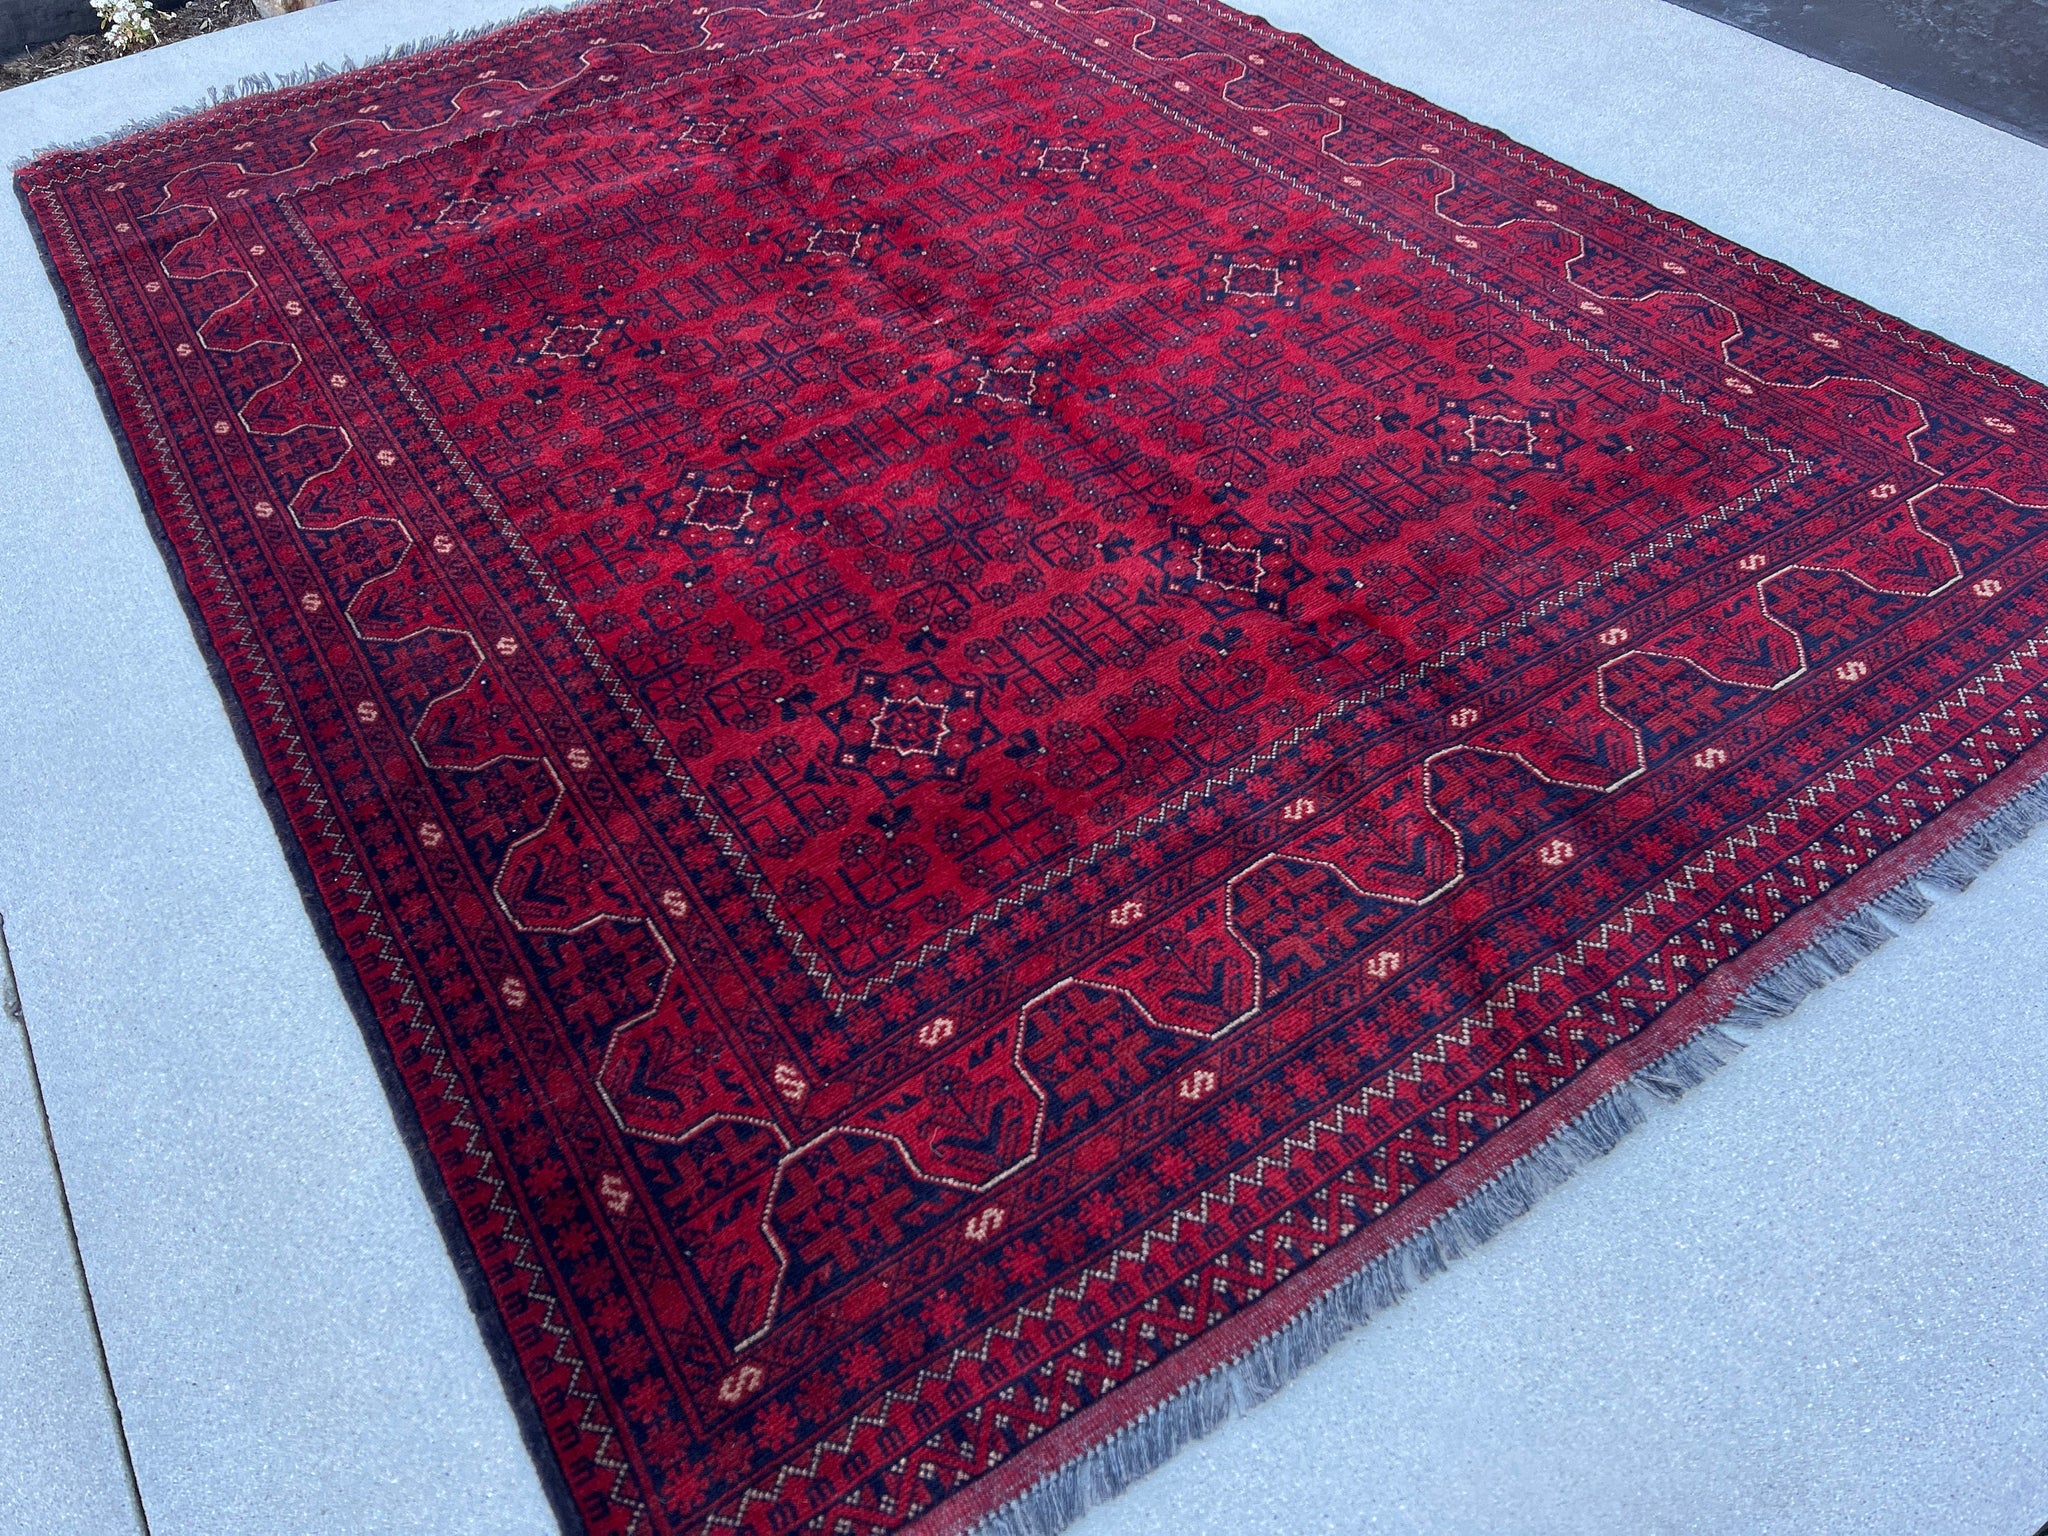 6x8 (180x245) Handmade Afghan Rug | Blood Crimson Red Indigo Charcoal Grey Ivory | Hand Knotted Floral Persian Turkish Wool